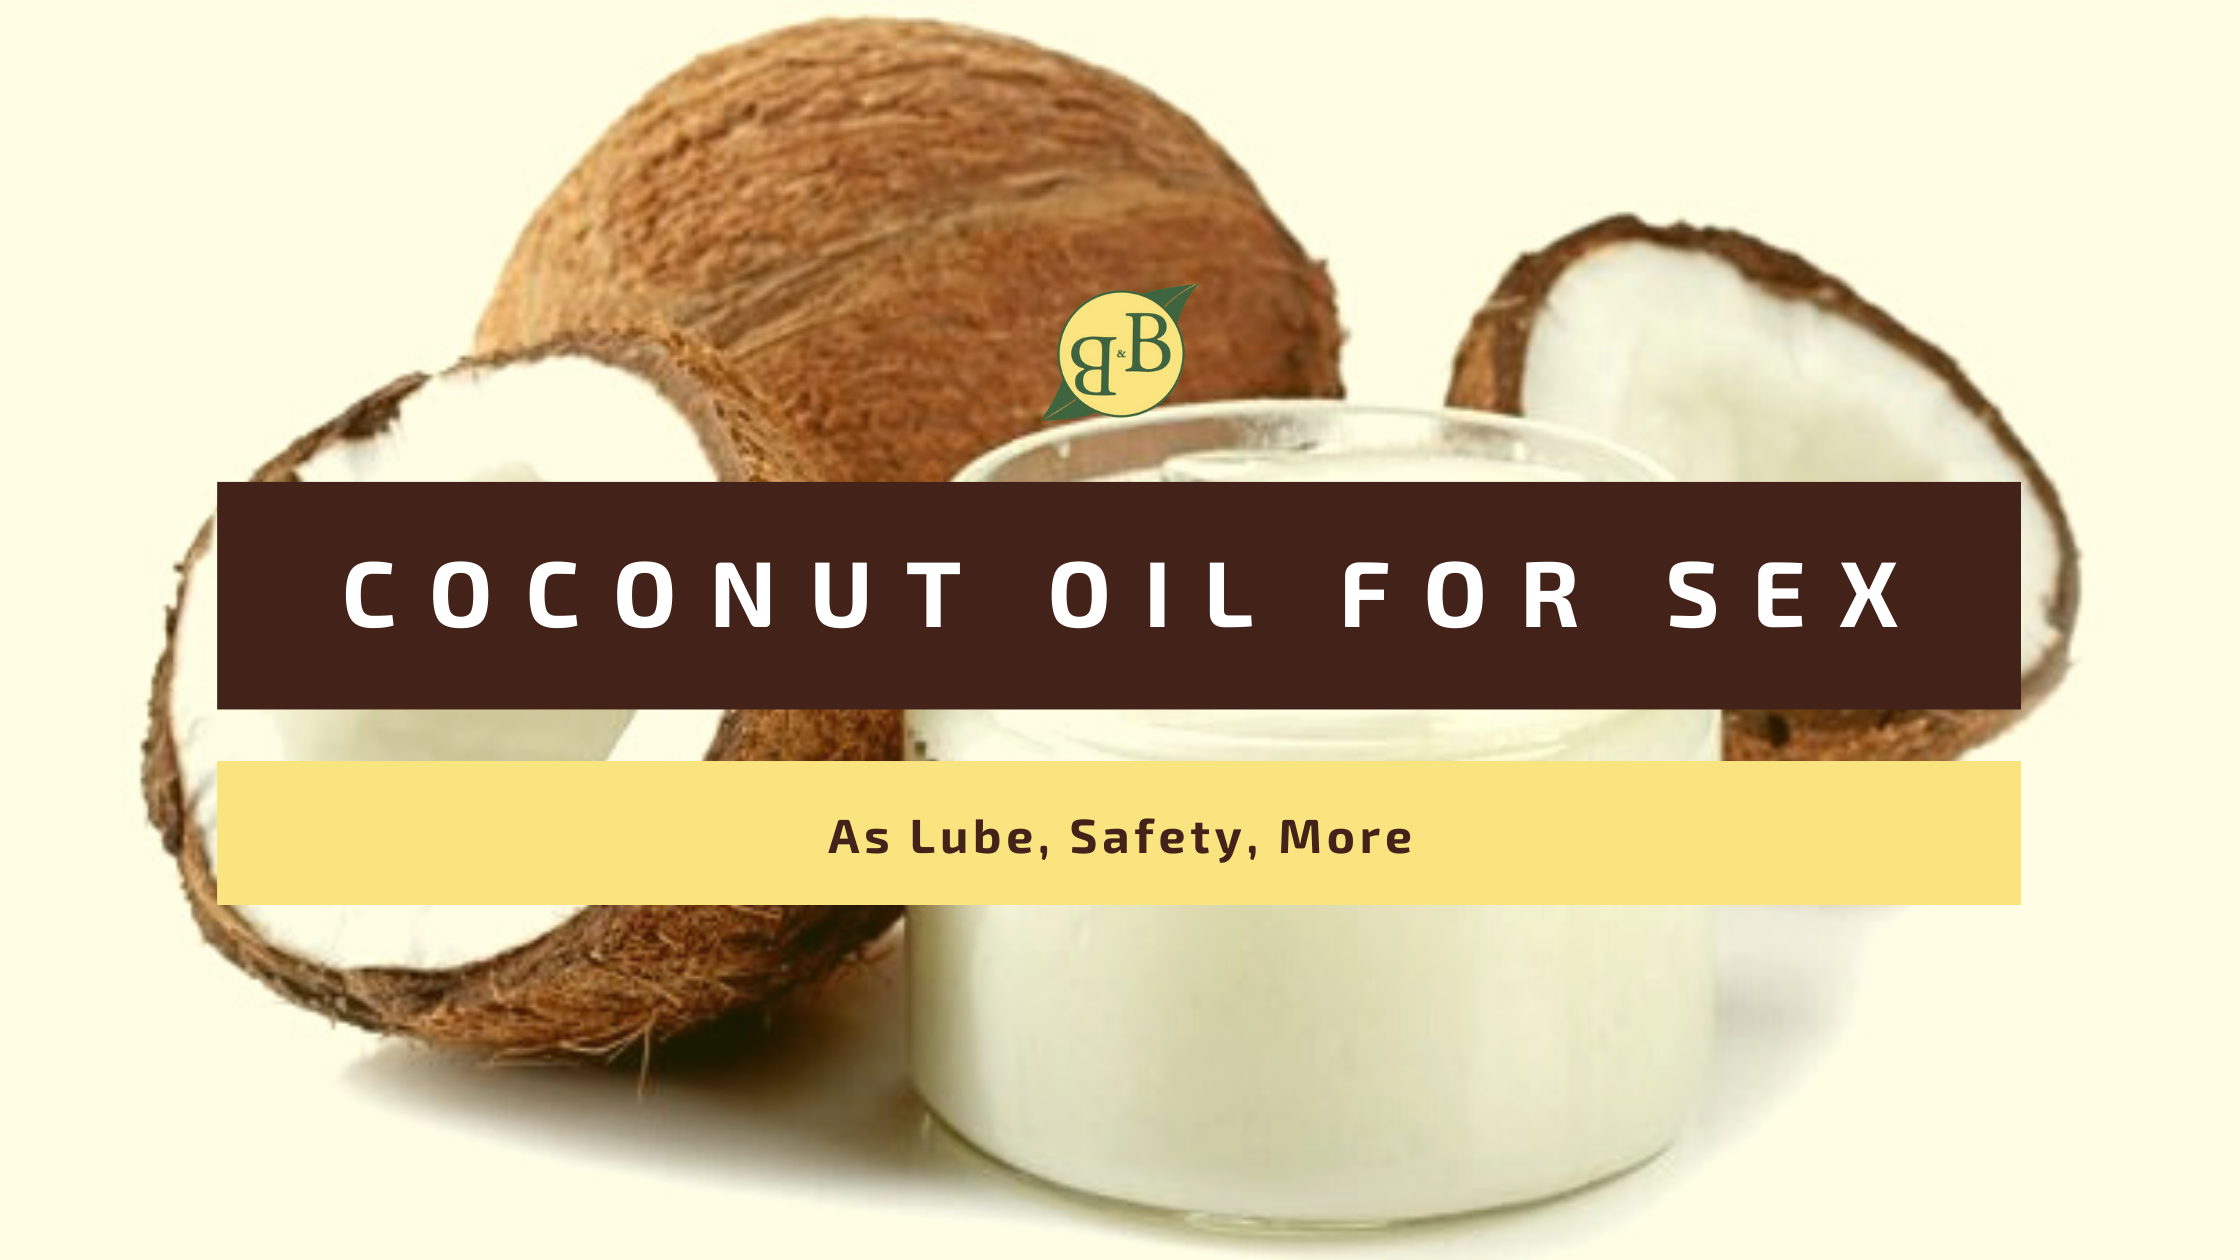 Coconut Oil for Sex As Lube, Safety, More